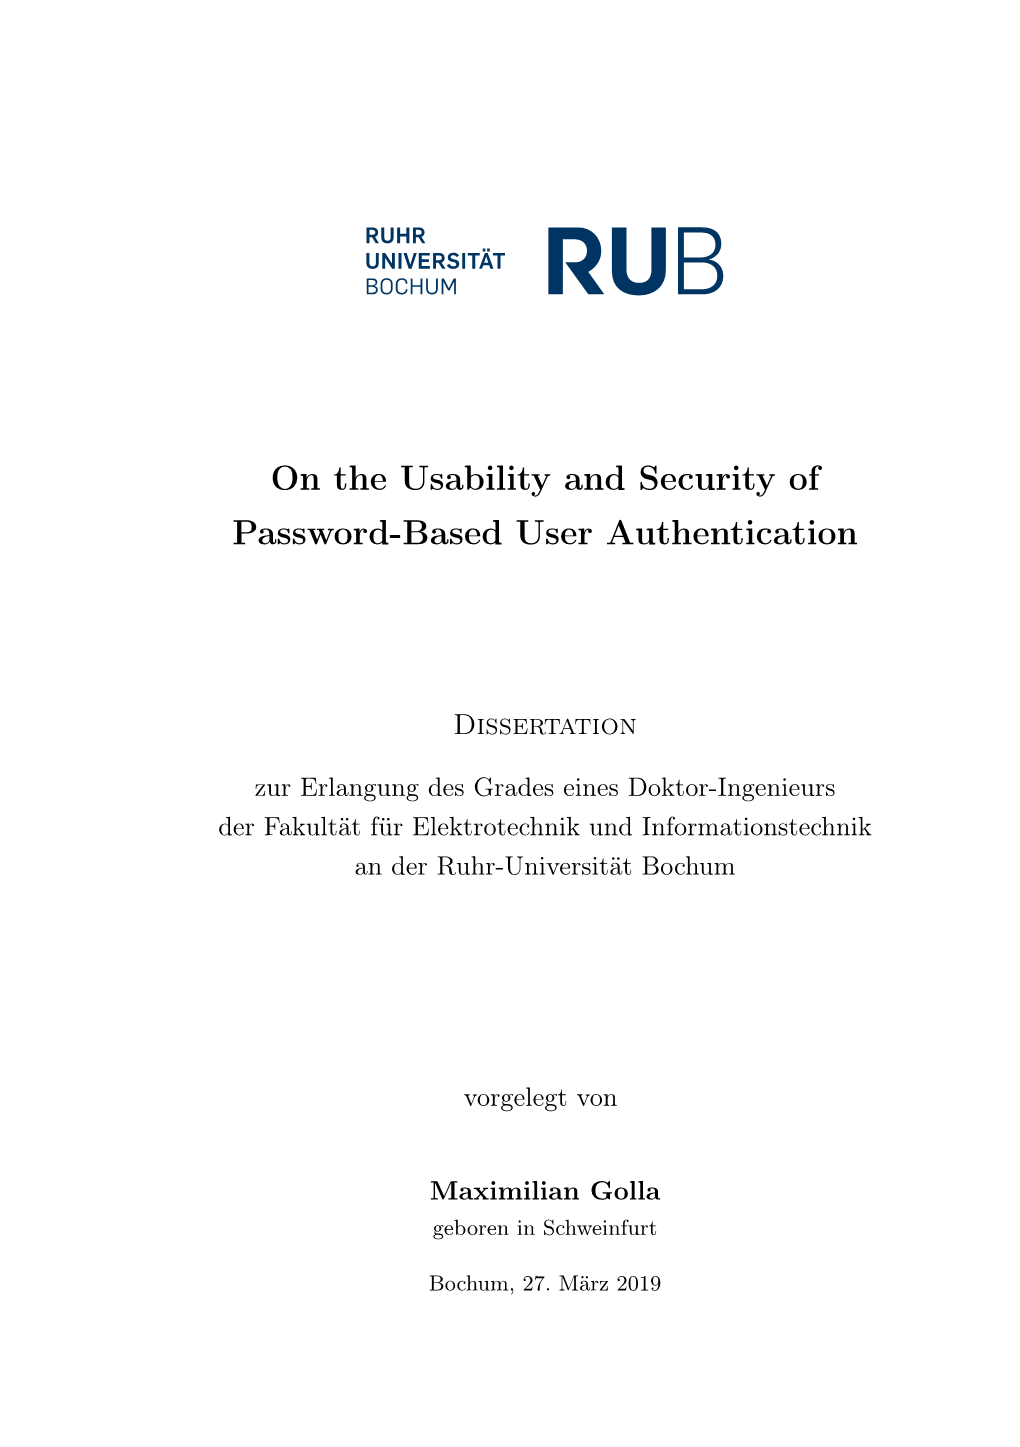 On the Usability and Security of Password-Based User Authentication